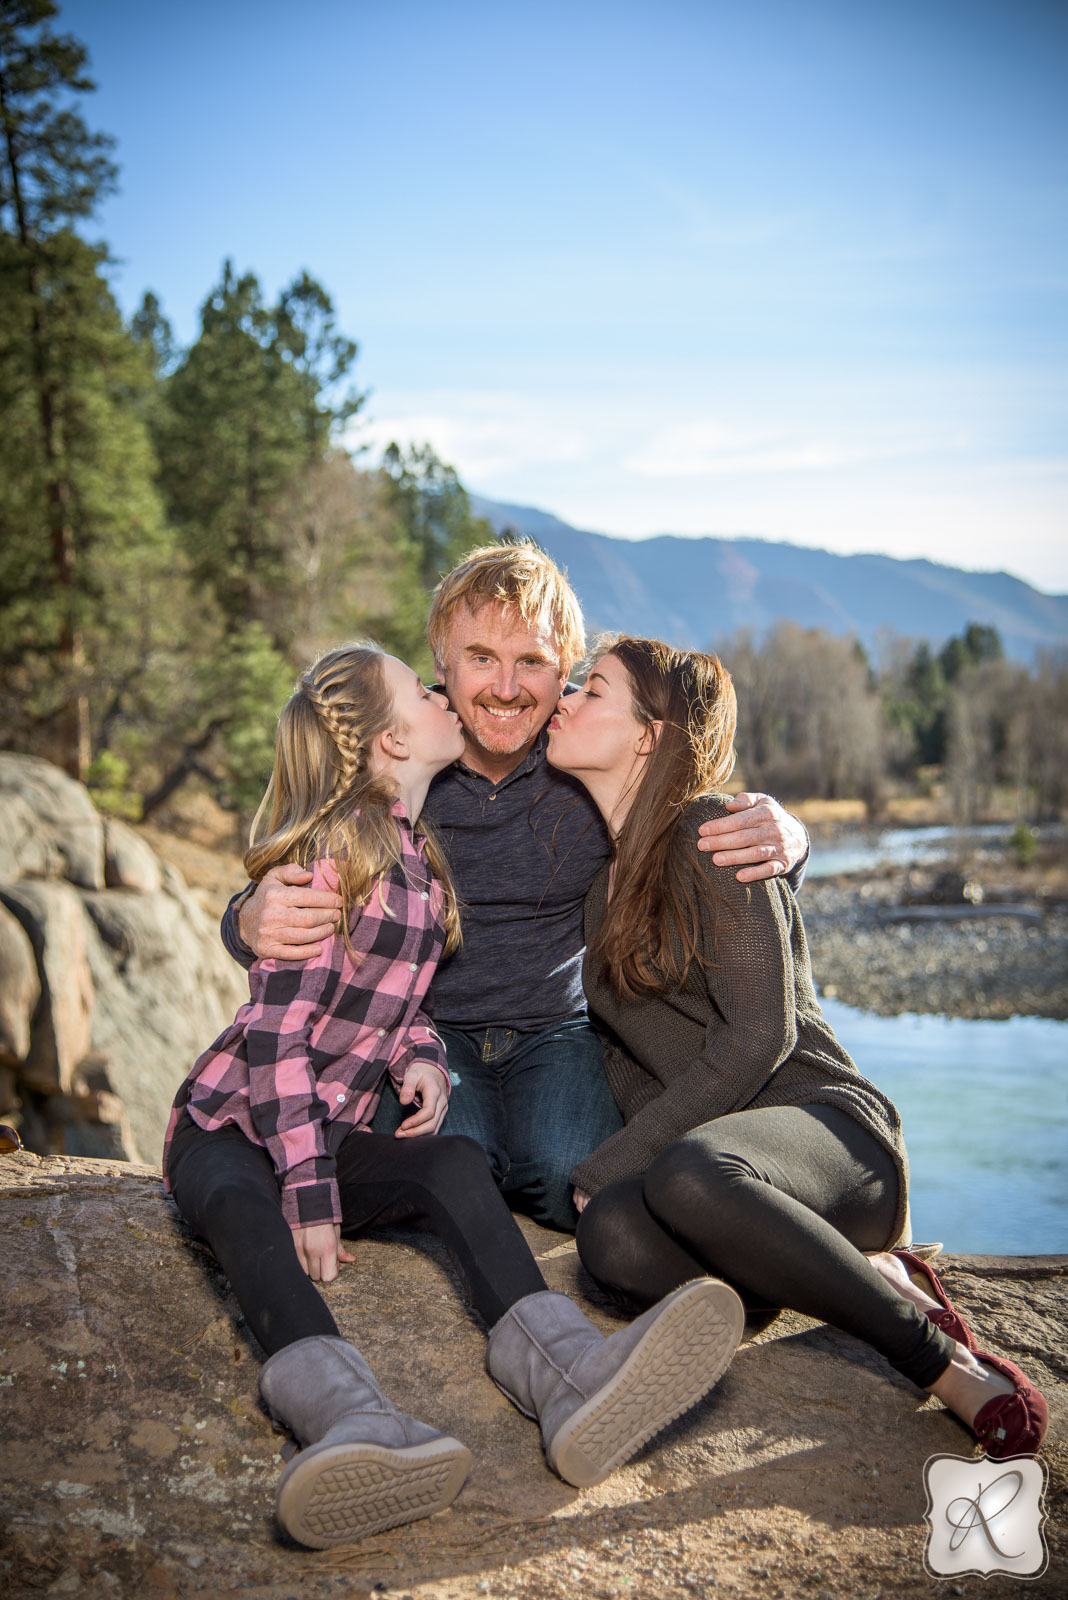 Family portraits done by Allison Ragsdale Photography in Durango Colorado 